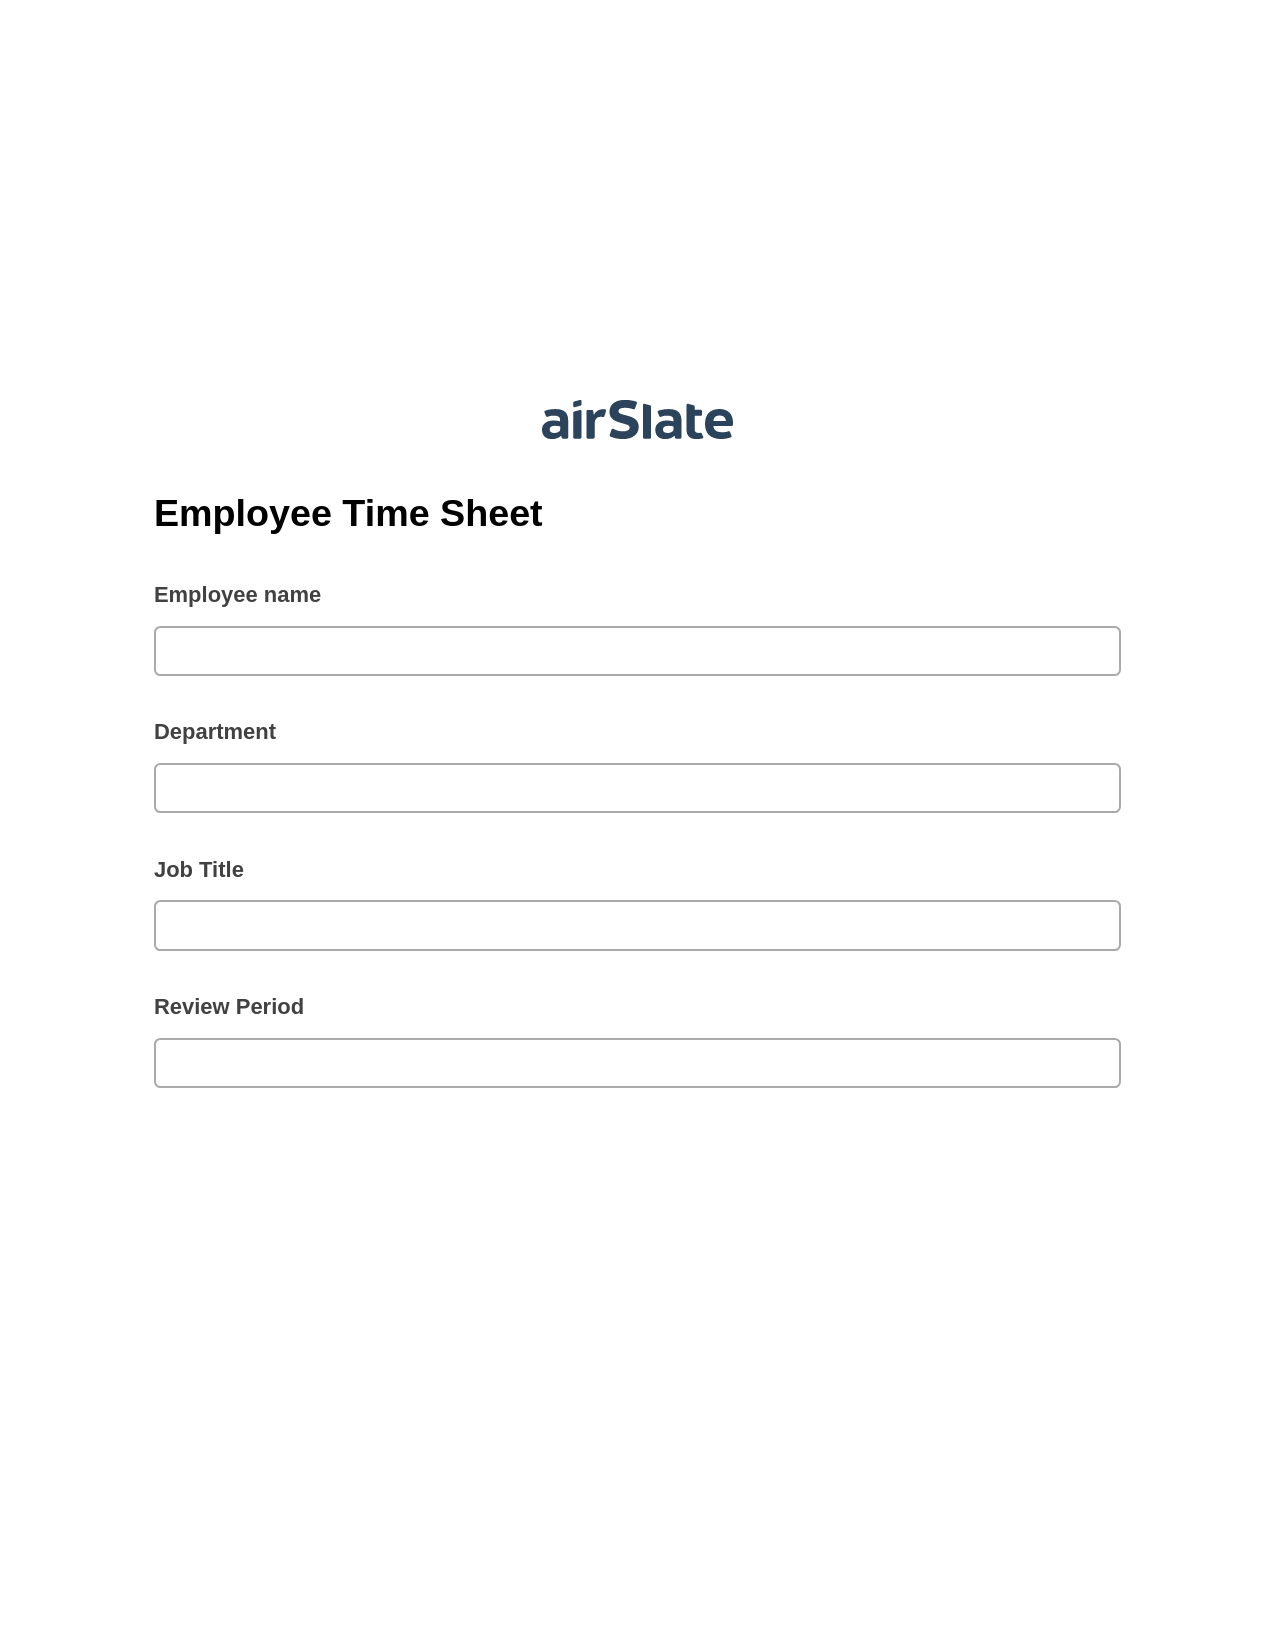 Employee Time Sheet Pre-fill Dropdowns from Airtable, Update Audit Trail Bot, Export to WebMerge Bot